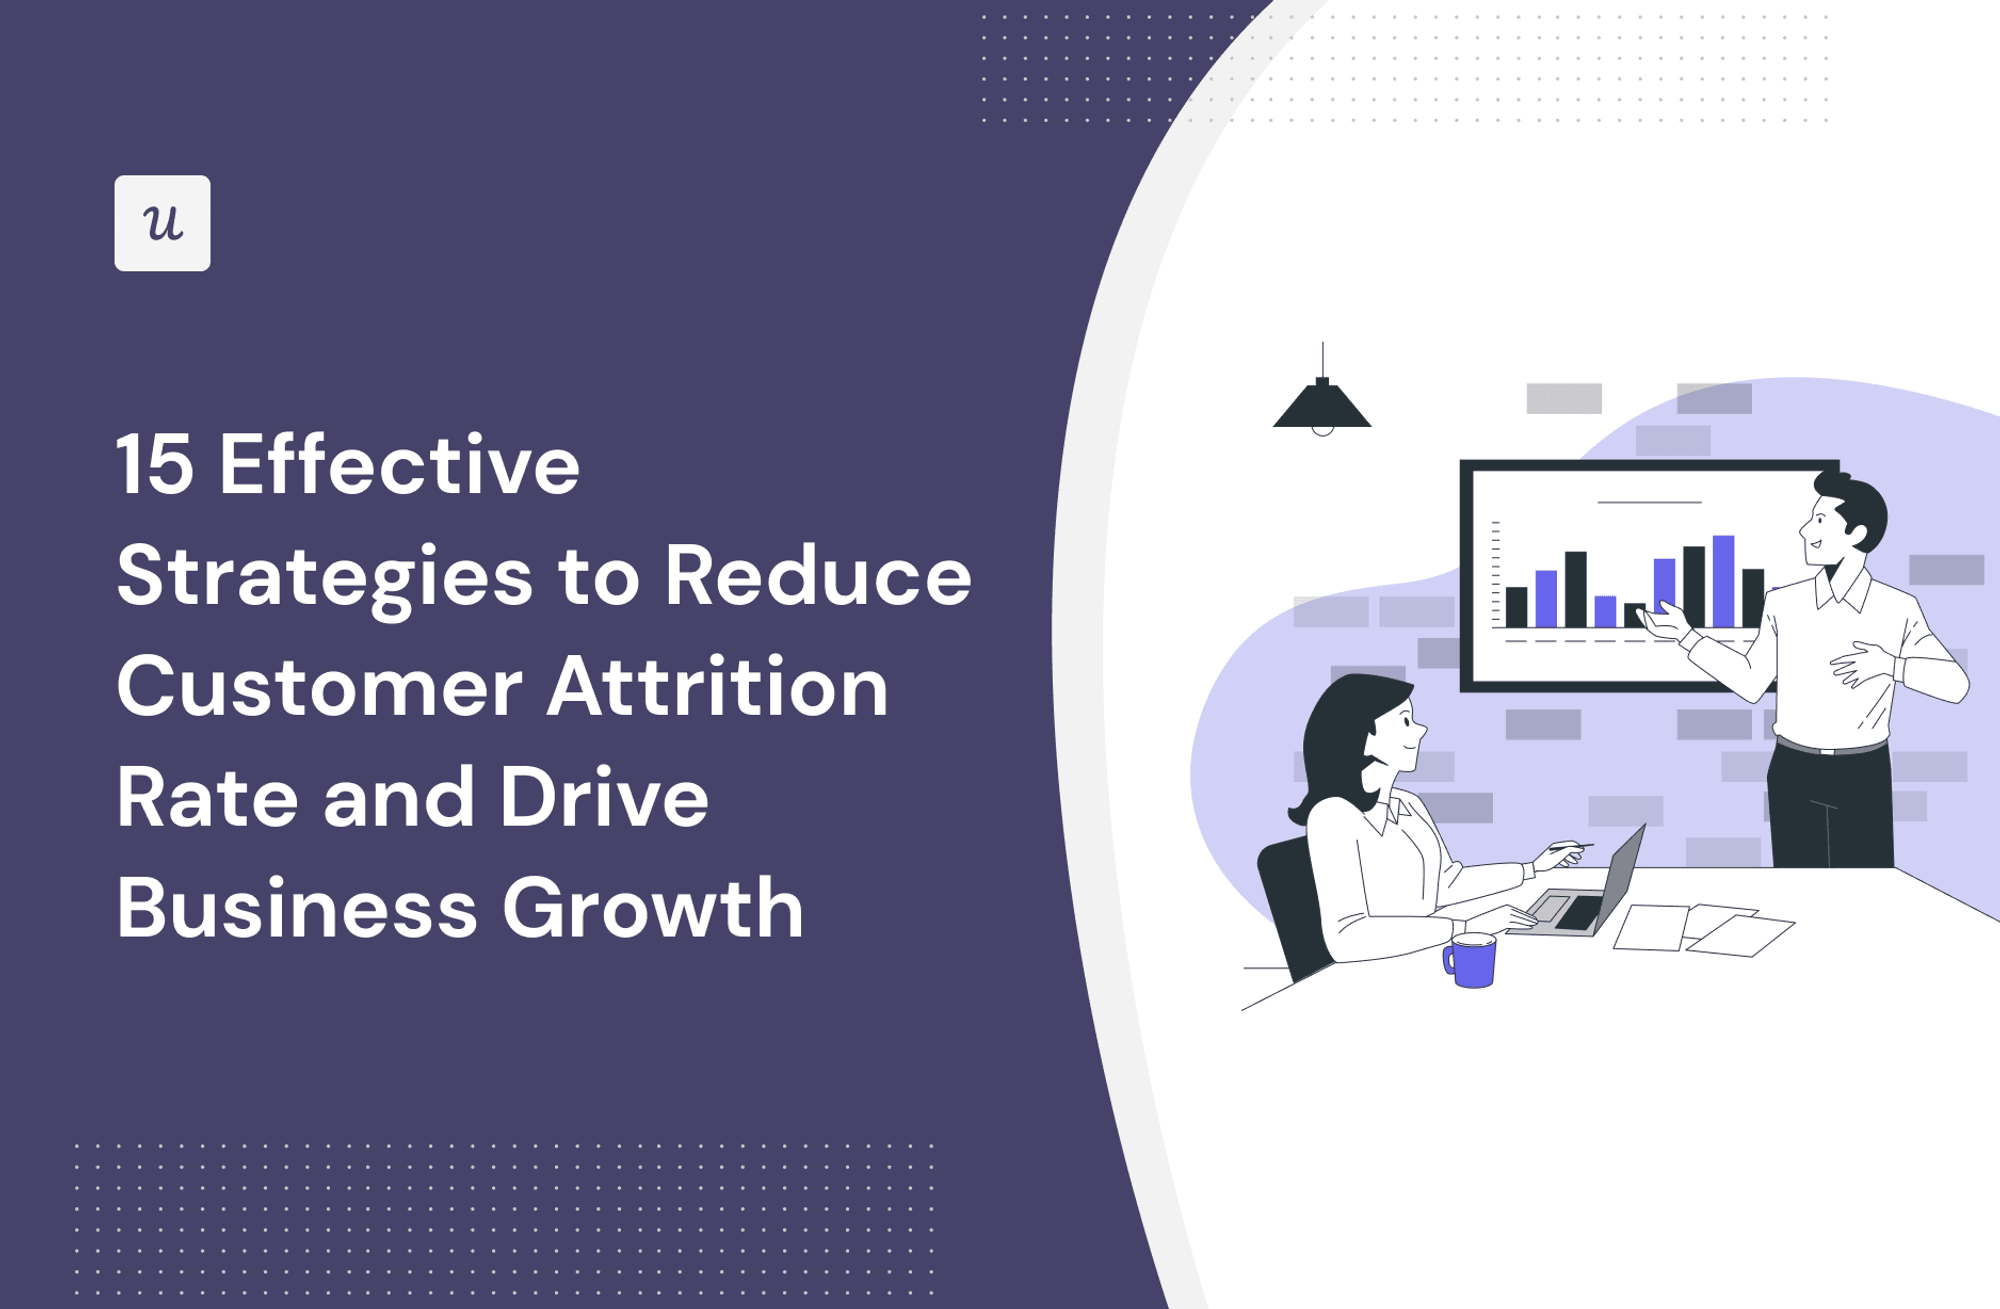 15 Effective Strategies to Reduce Customer Attrition Rate and Drive Business Growth cover